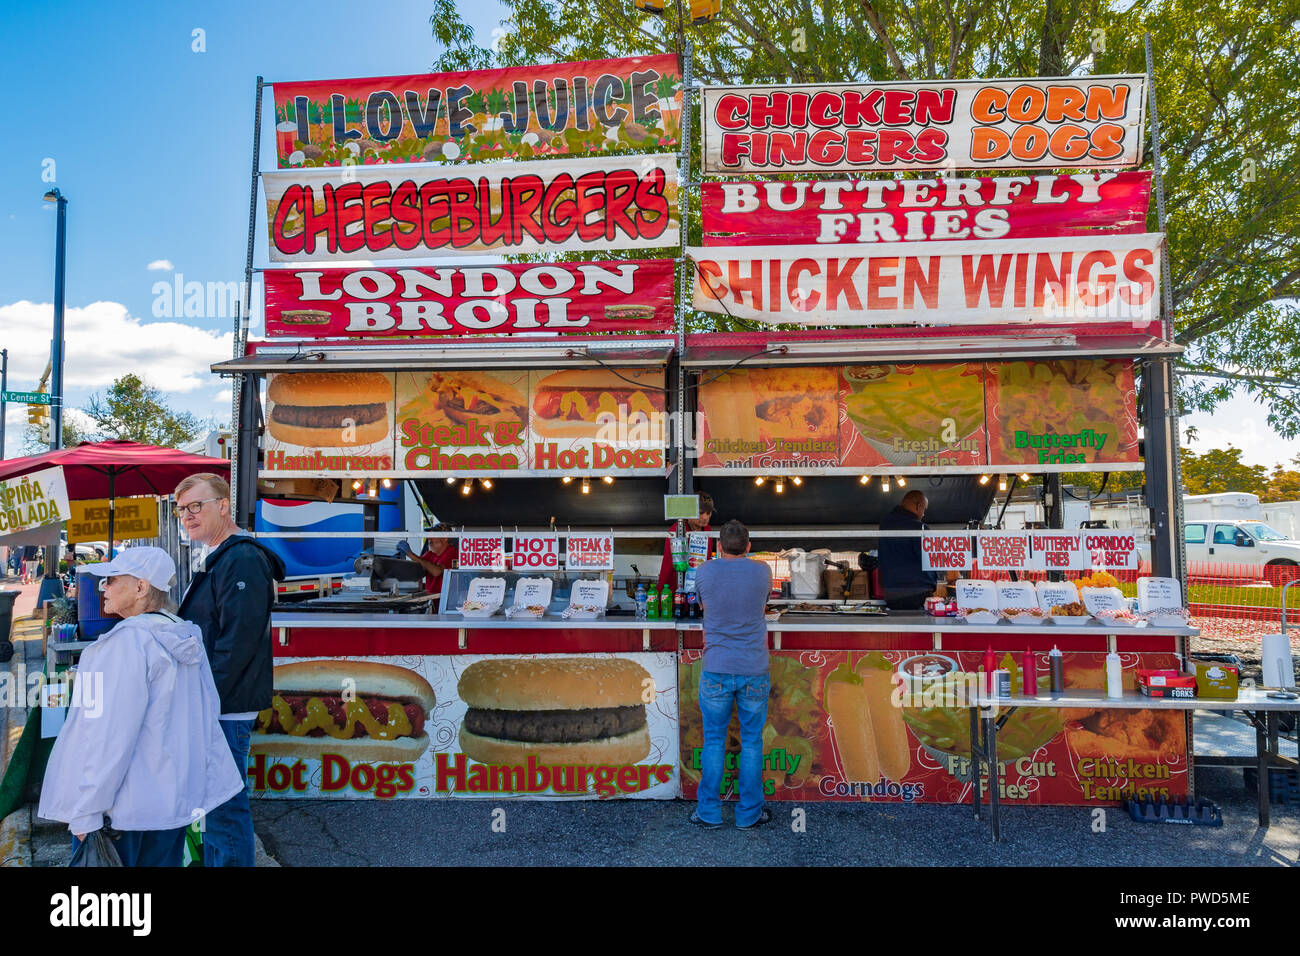 HICKORY, NC, USA-10/14/18: A concession stand at a local fall festival offers cheeseburgers and chicken wings. Stock Photo